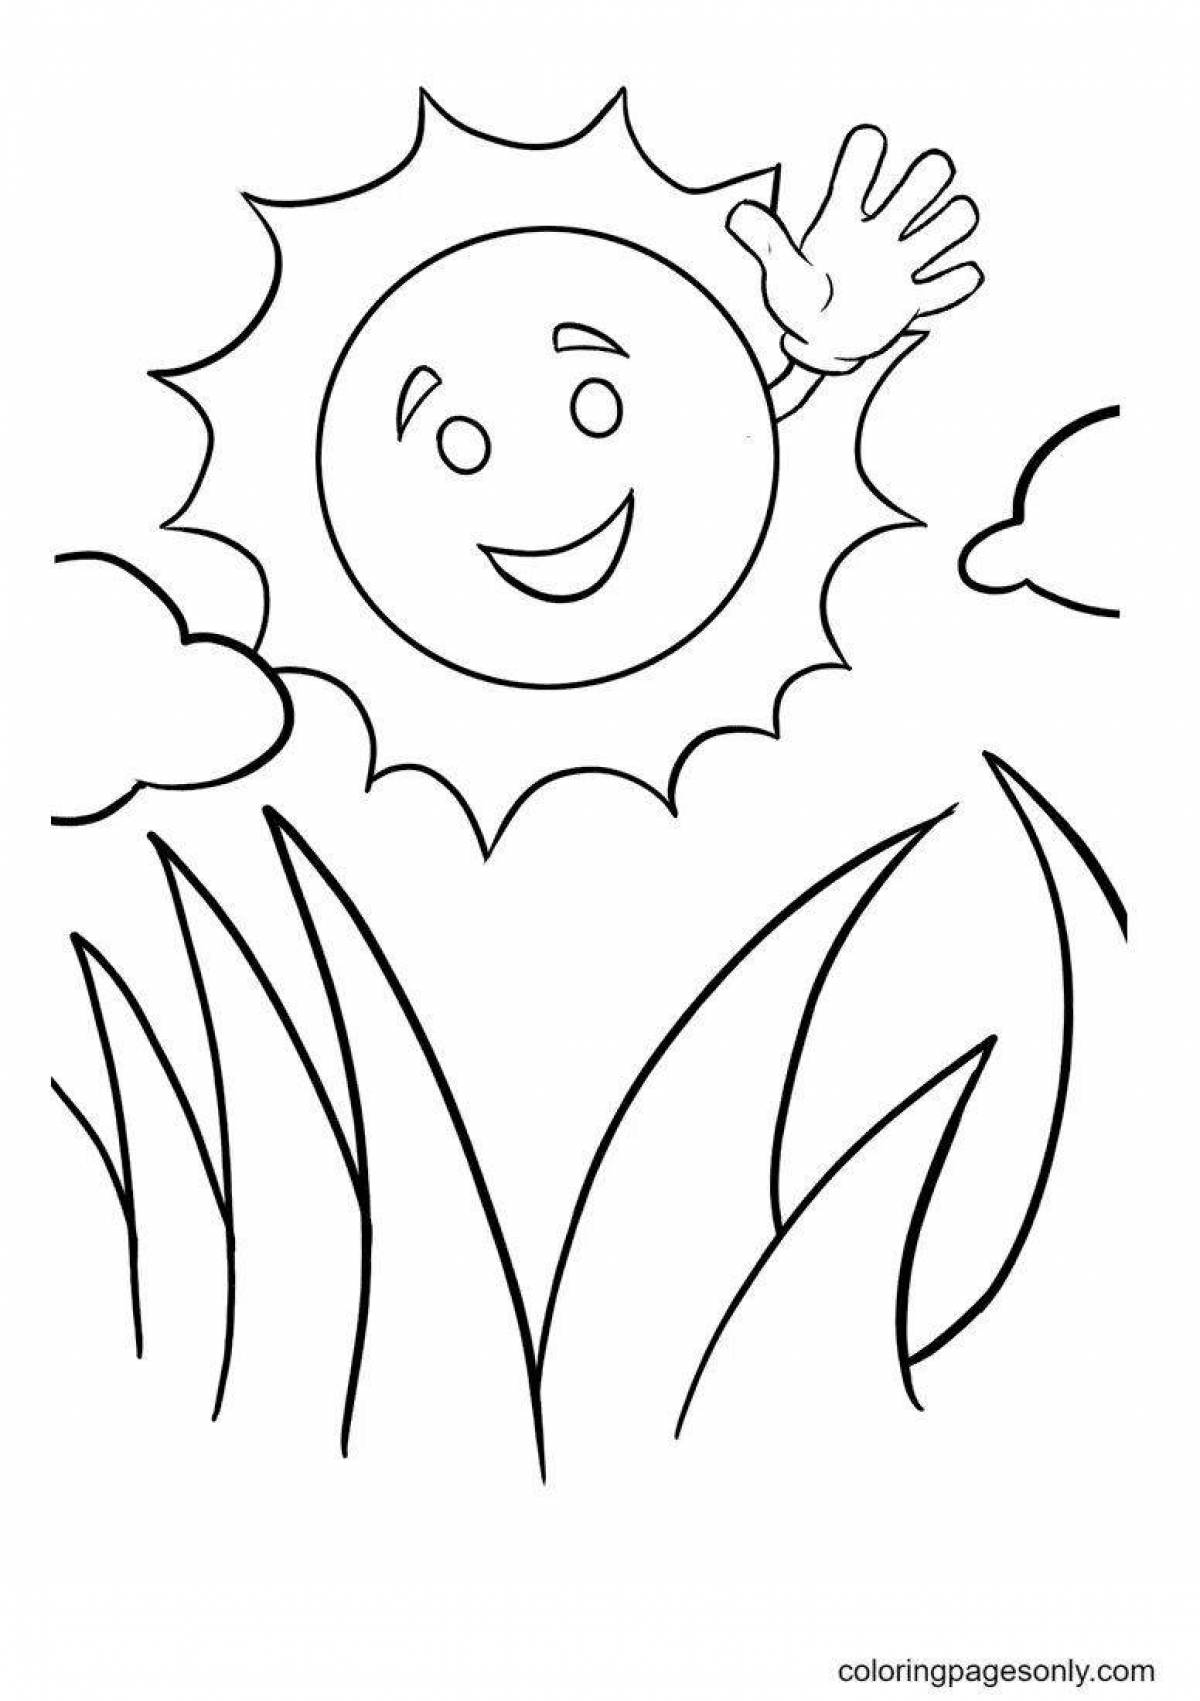 Cute sun coloring book for 4-5 year olds